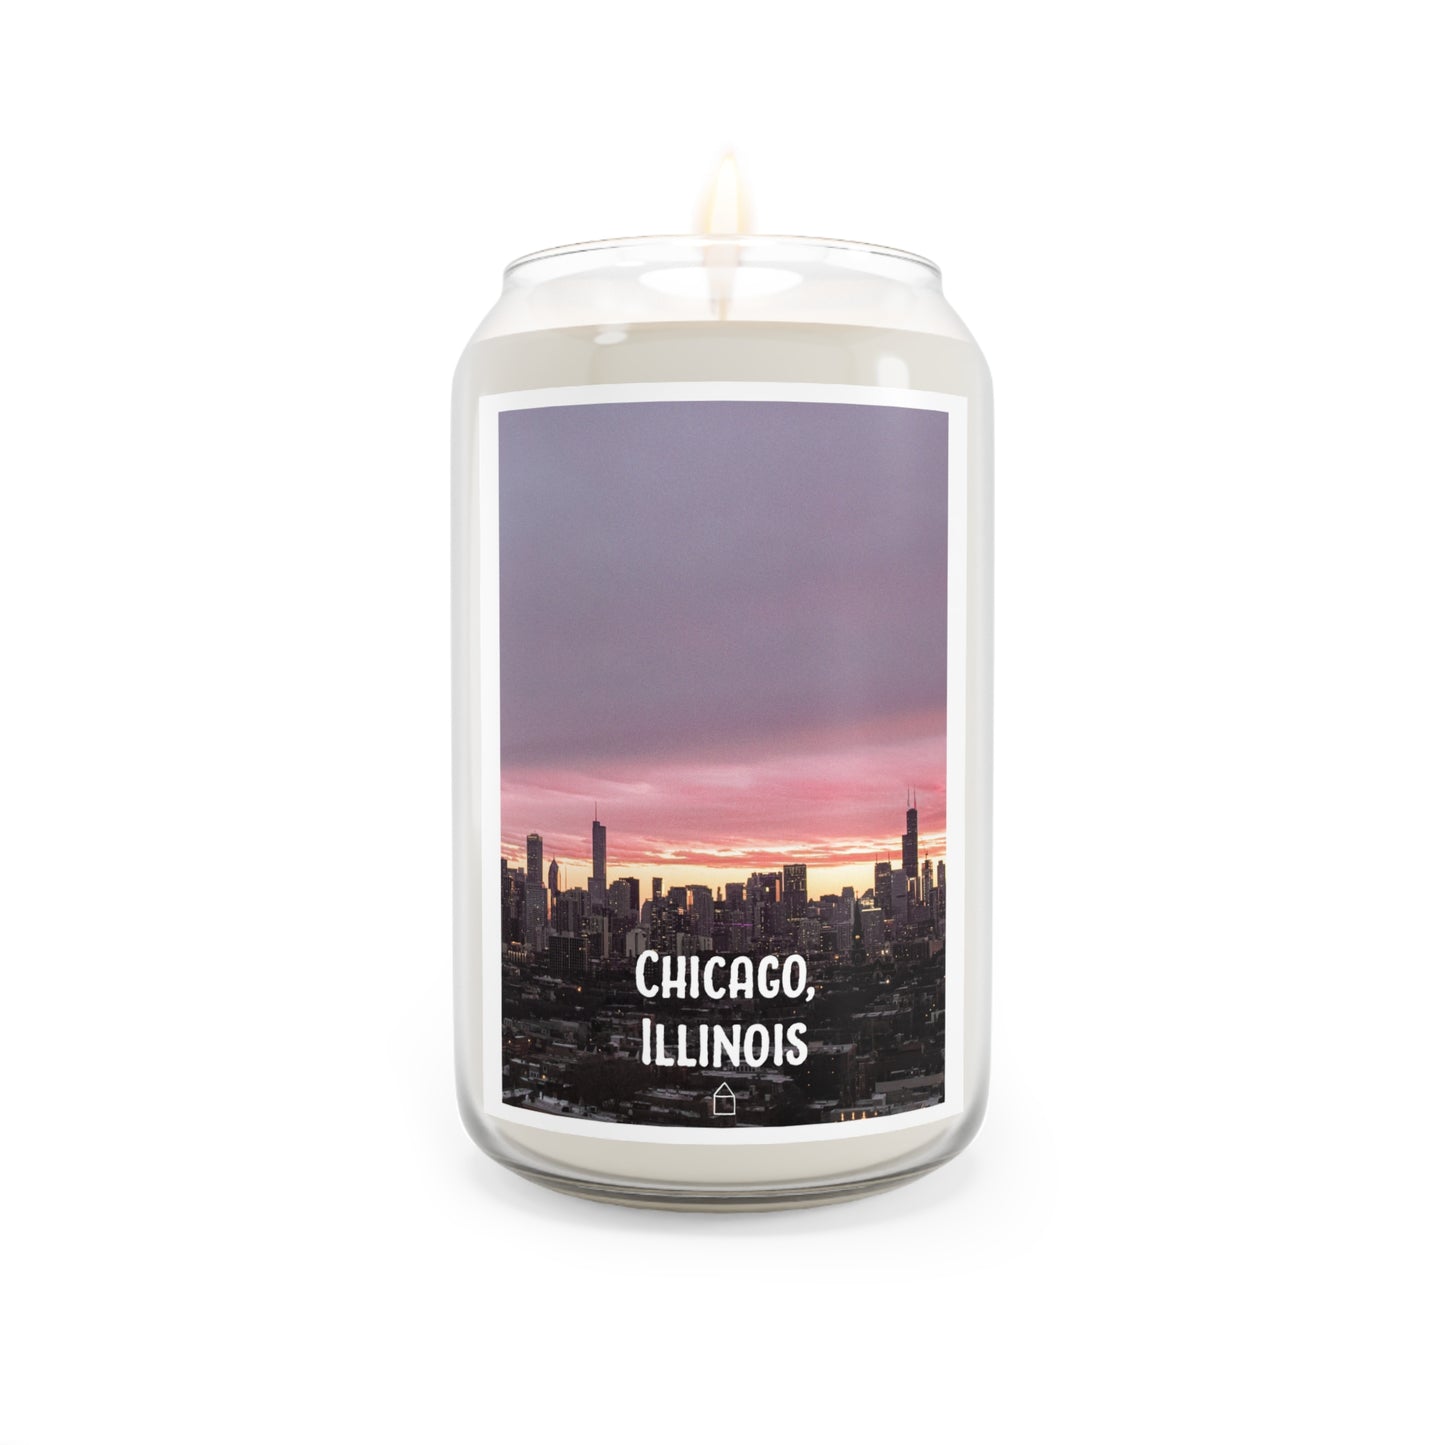 Chicago, Illinois (#006) - Home Town Candles, 13.75oz